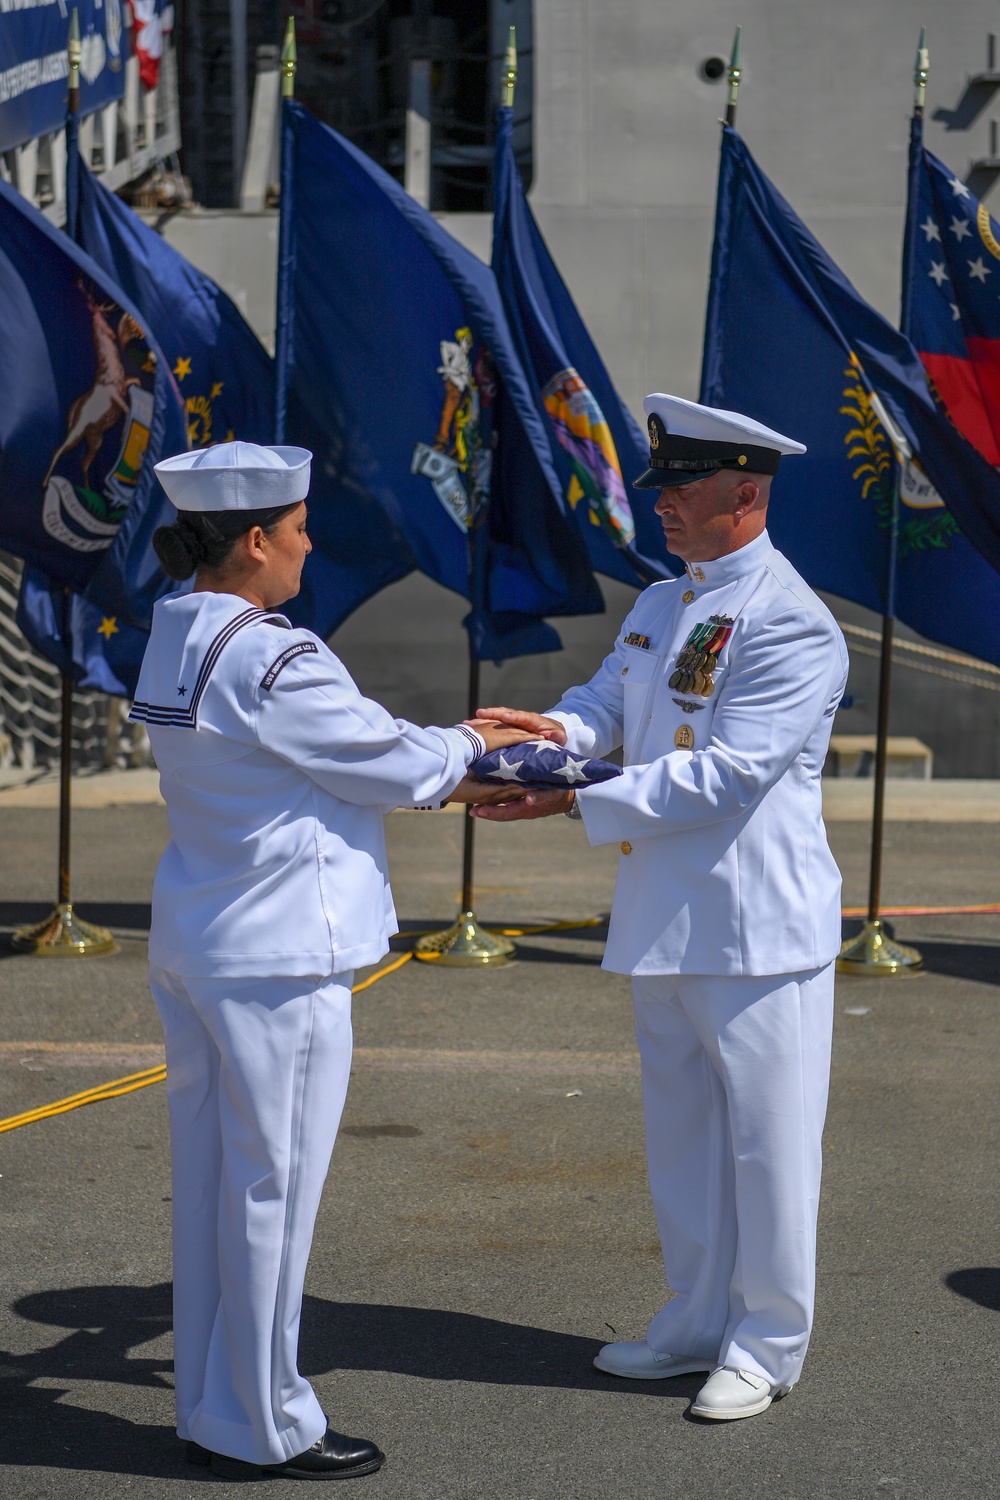 CMDCS Robert Strupczewski receives the ensign during the decommisioning of USS Independence (LCS 2)